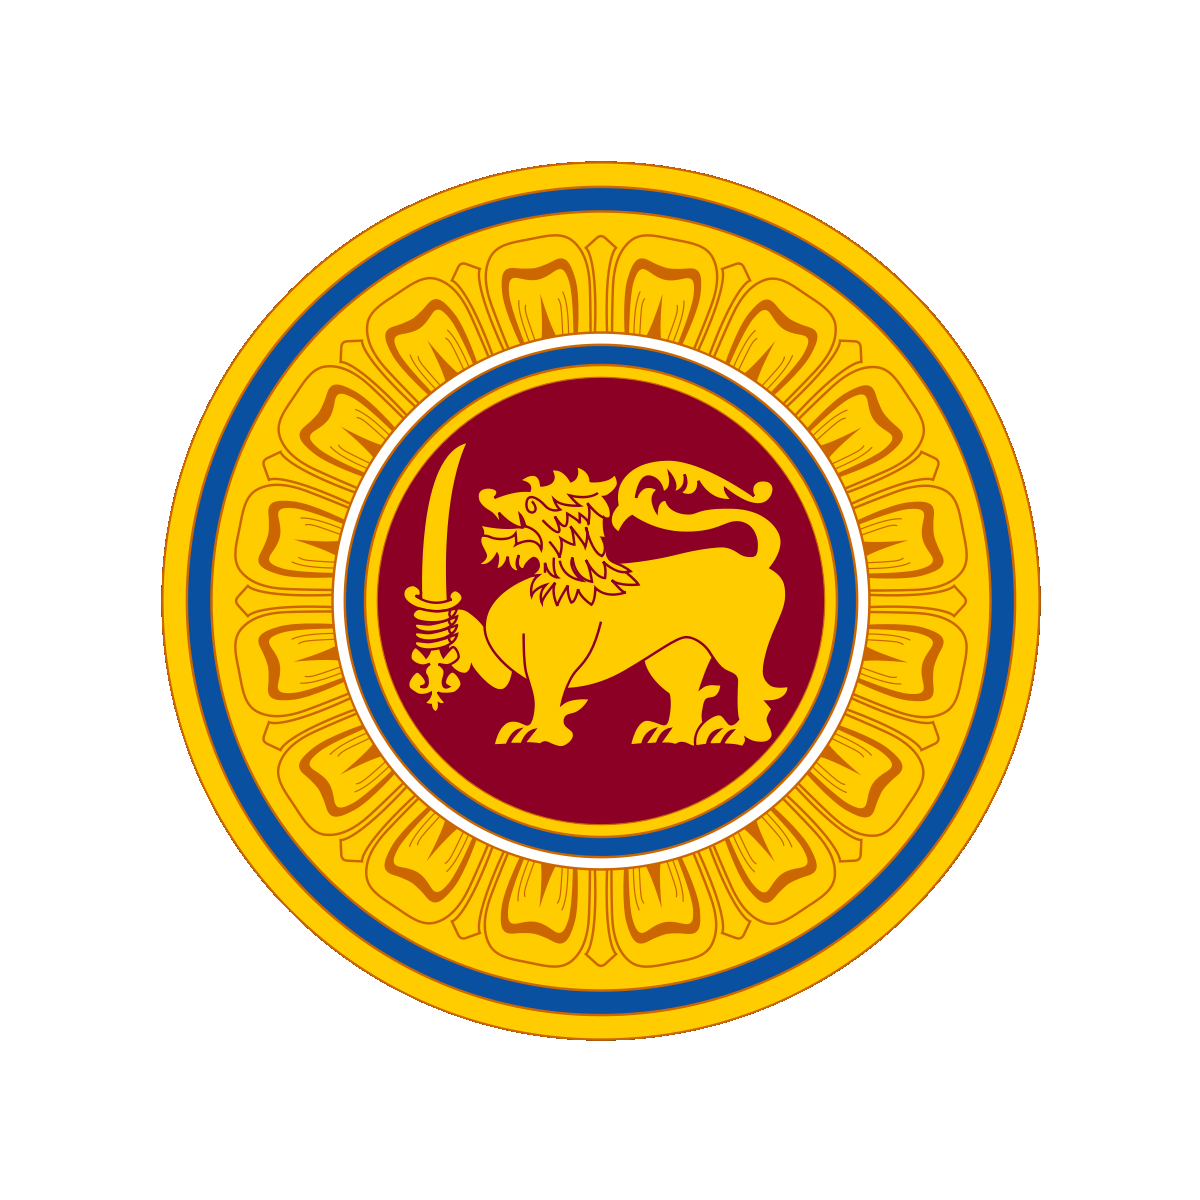 News from the Sri Lanka National Olympic Committee - Olympic News